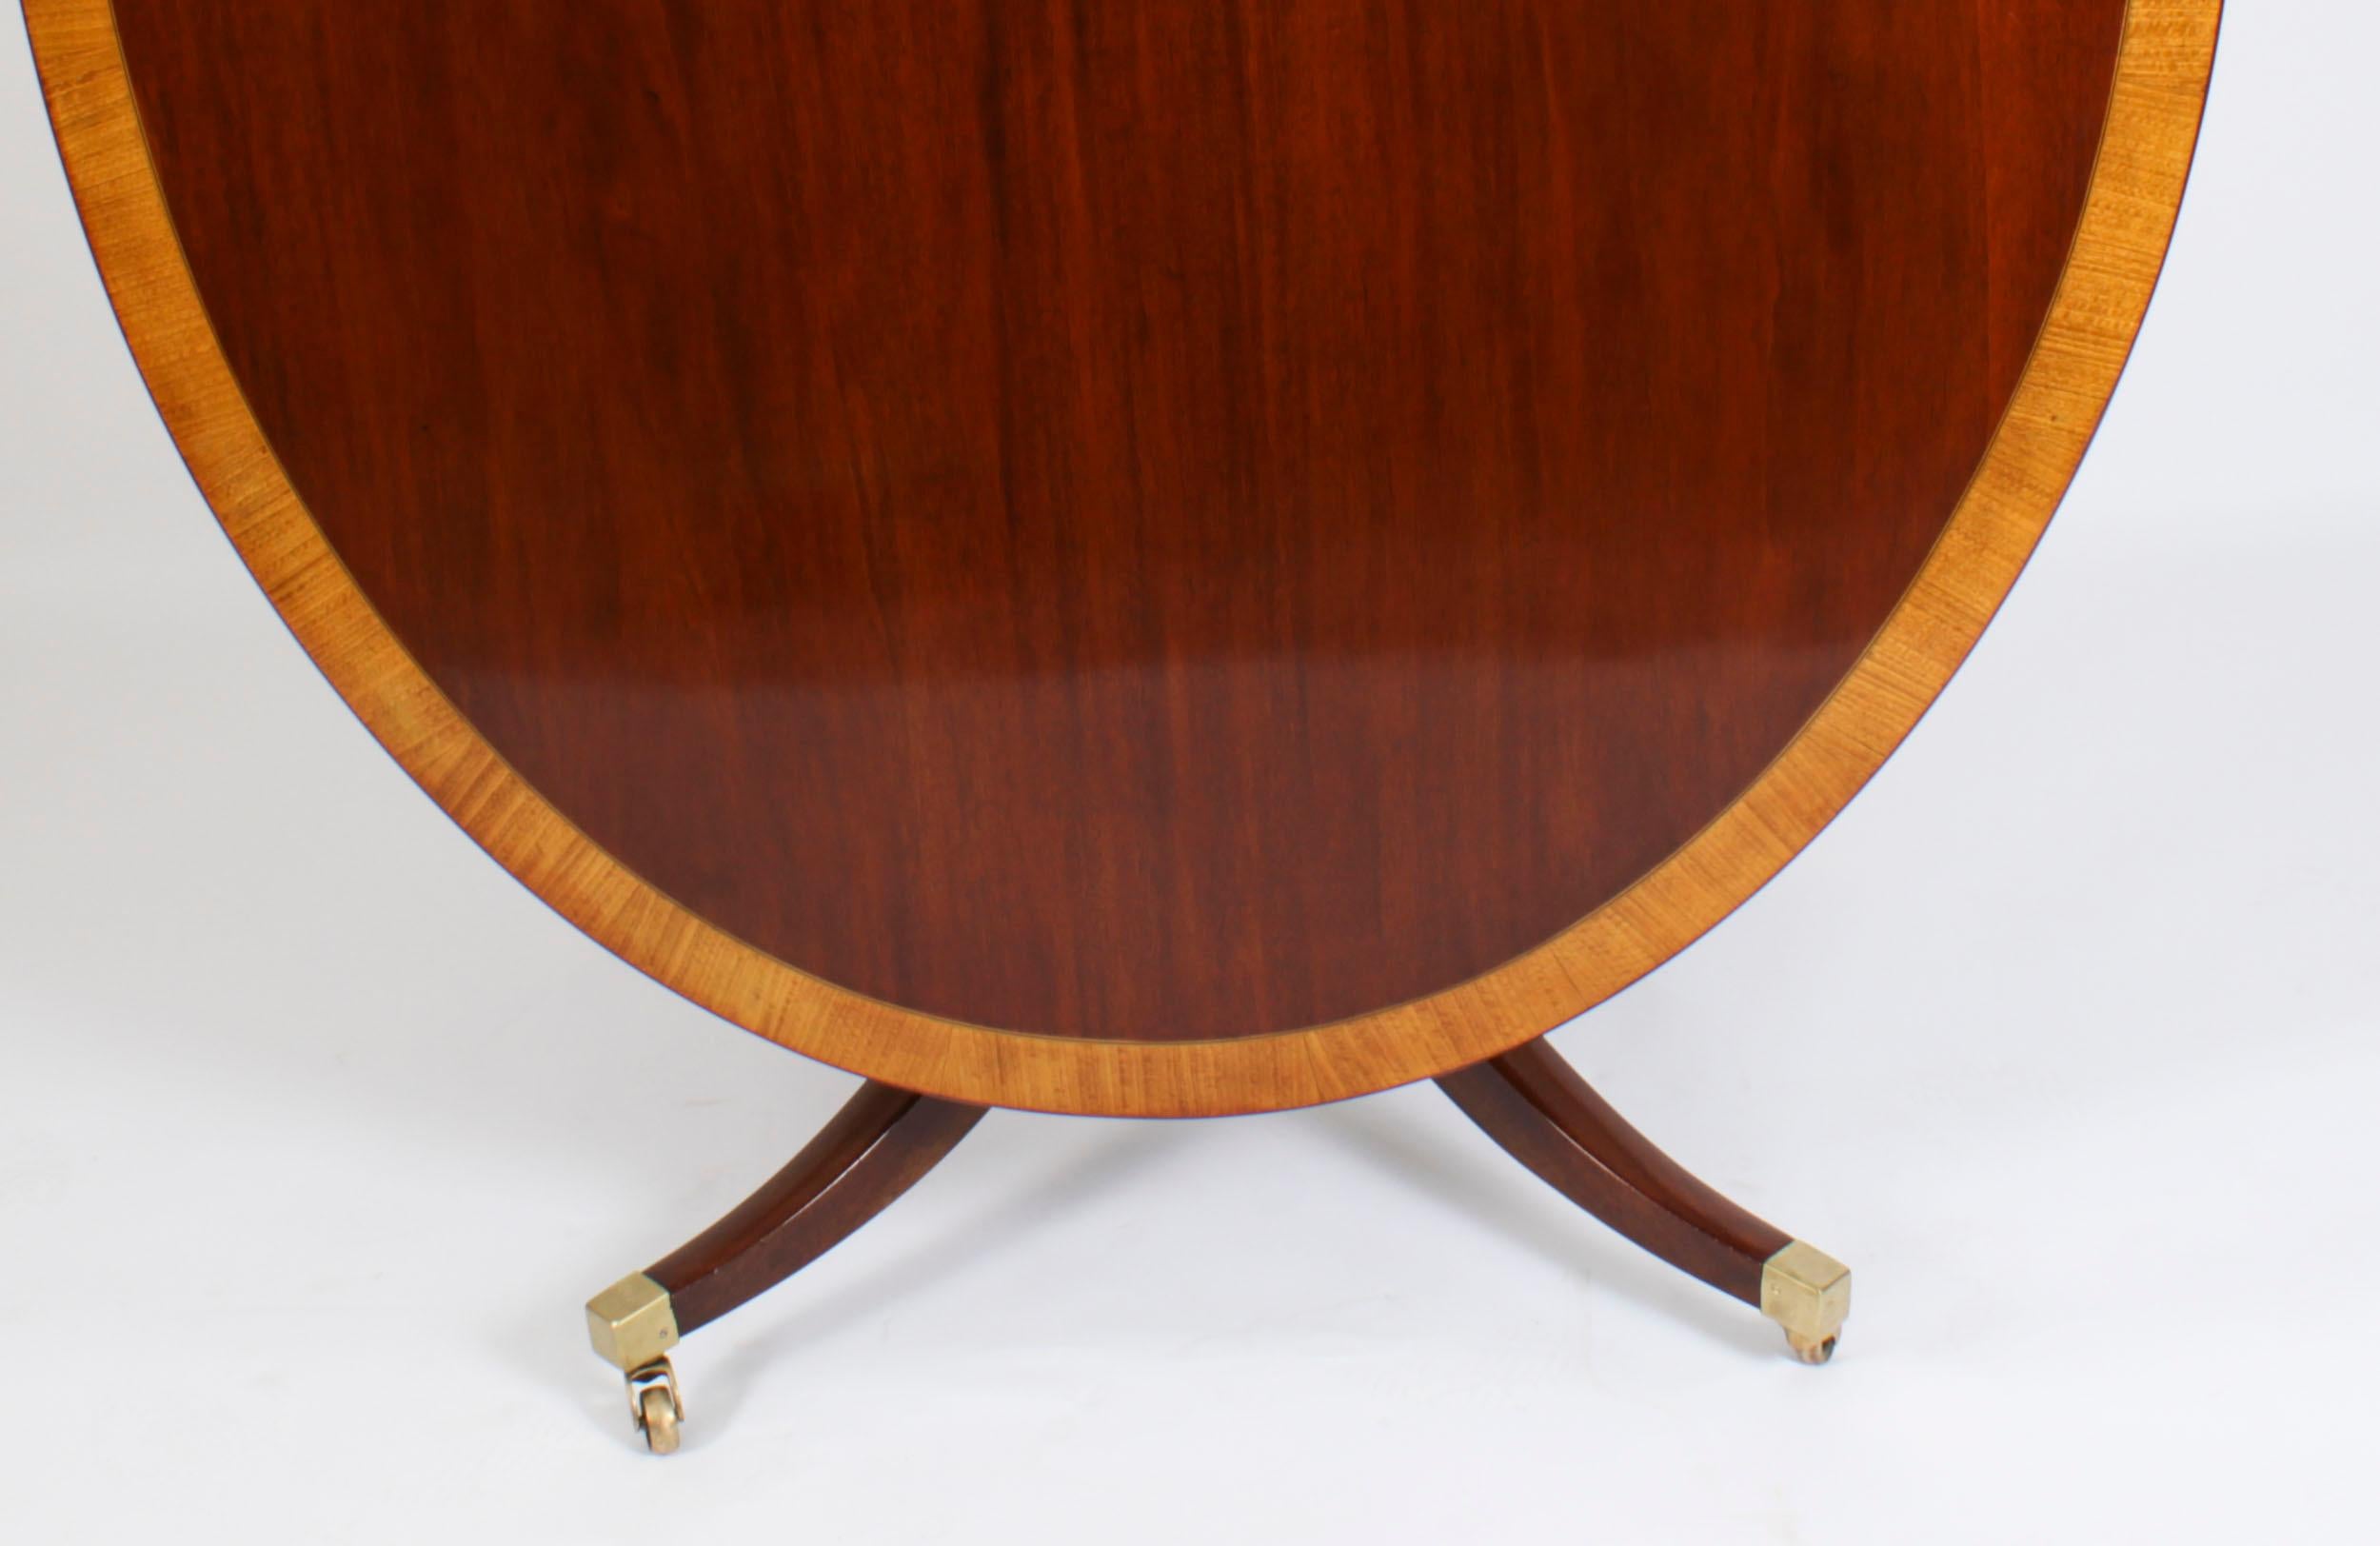 Antique Oval Mahogany Tilt Top Dining Table, Early 20th Century 1